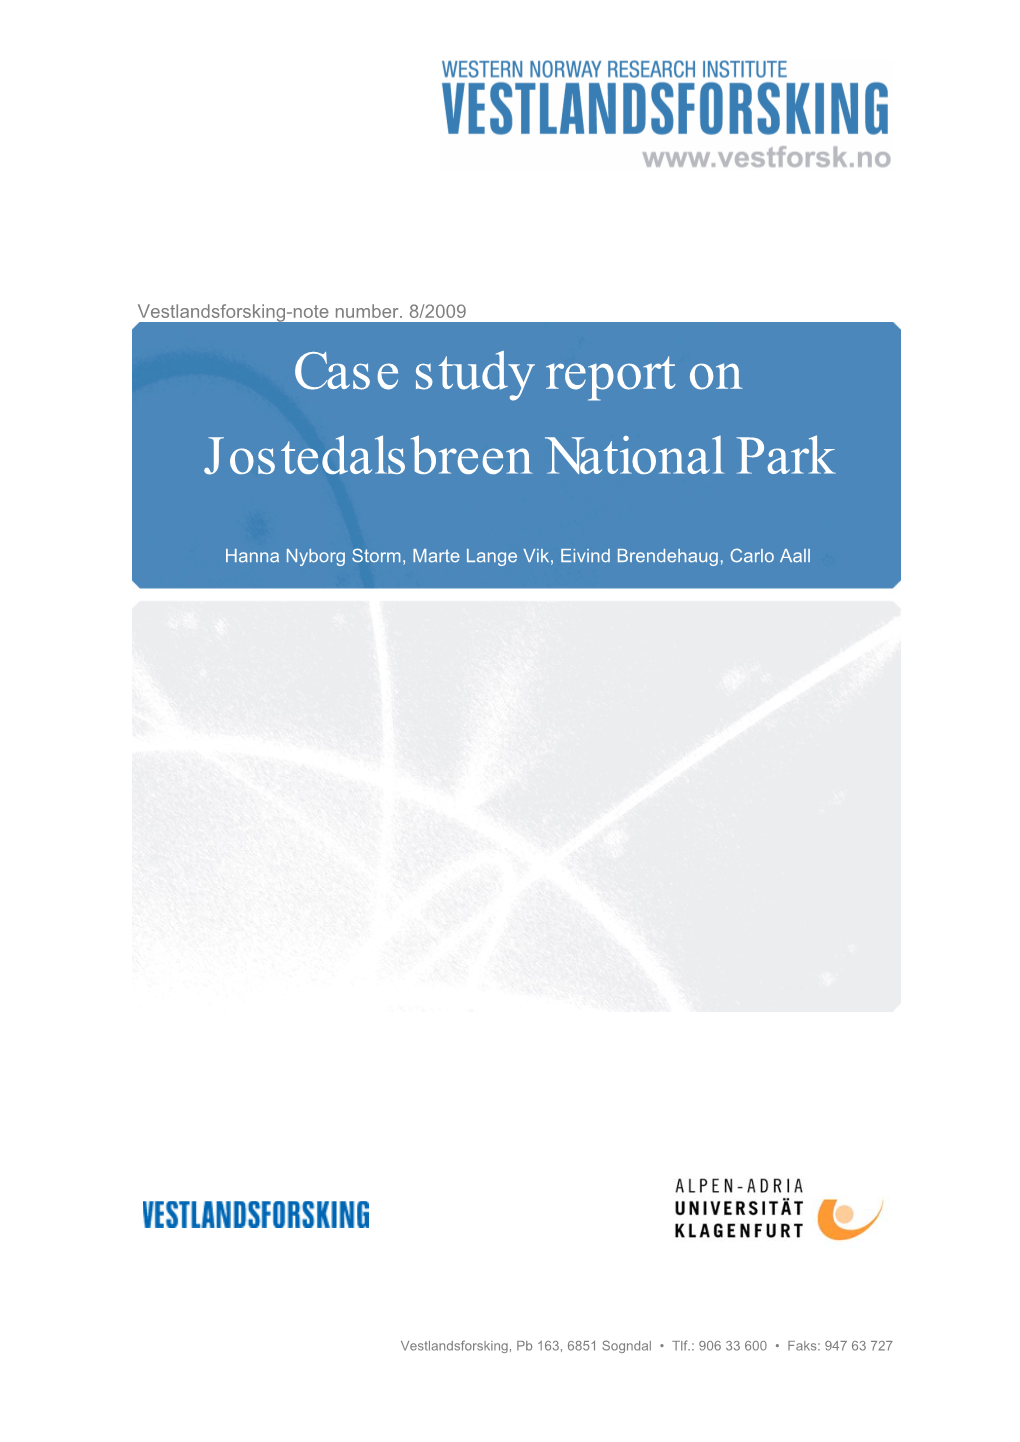 Case Study Report on Jostedalsbreen National Park